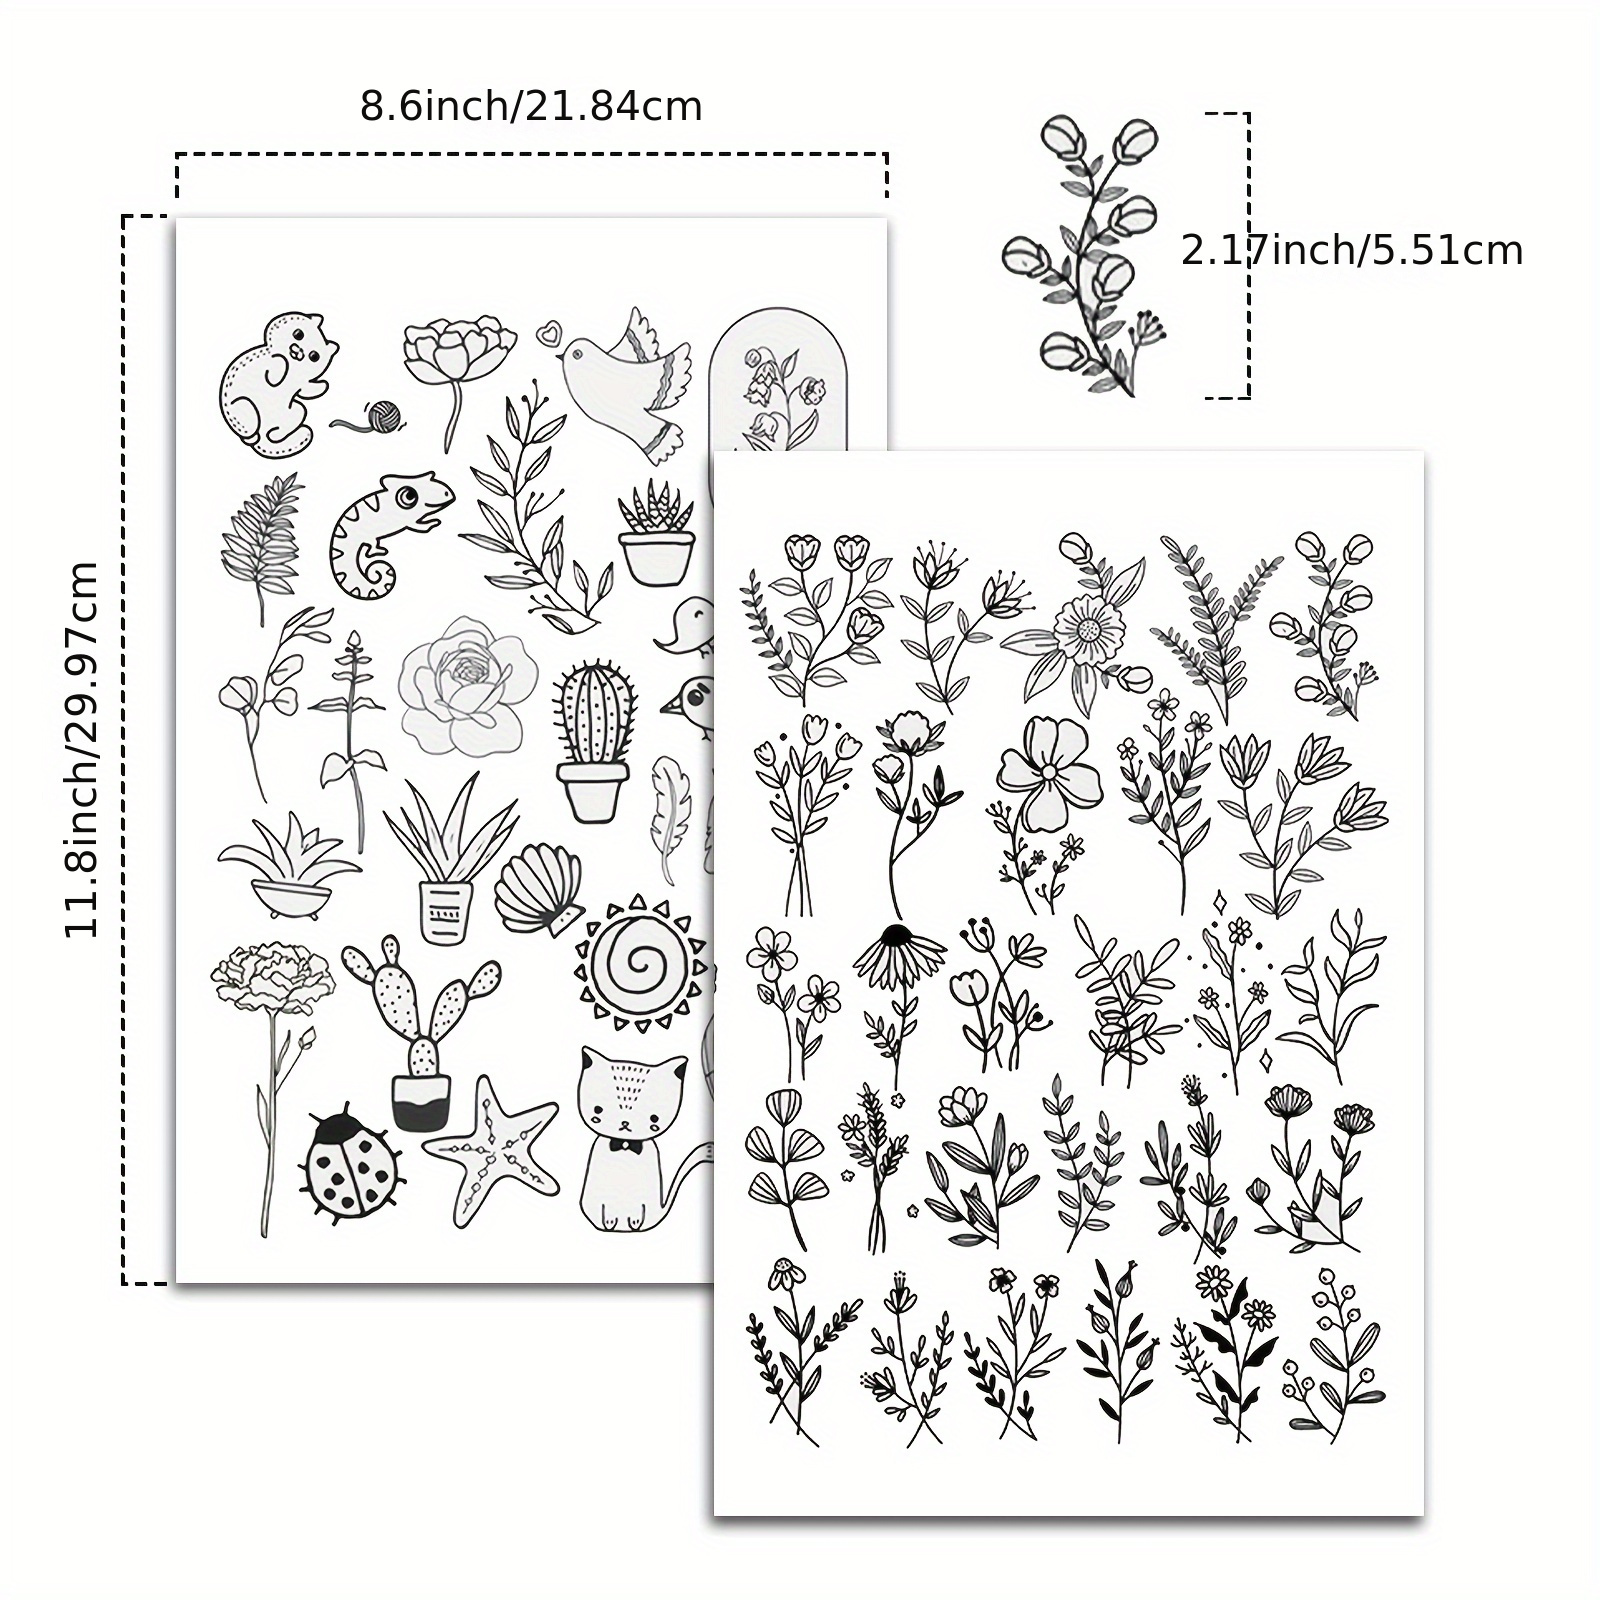 59pcs Water Soluble Stabilizer for Embroidery,Stick and Stitch Embroidery Paper,Embroidery Patterns,Embroidery Transfer Paper,Embroidery Patterns